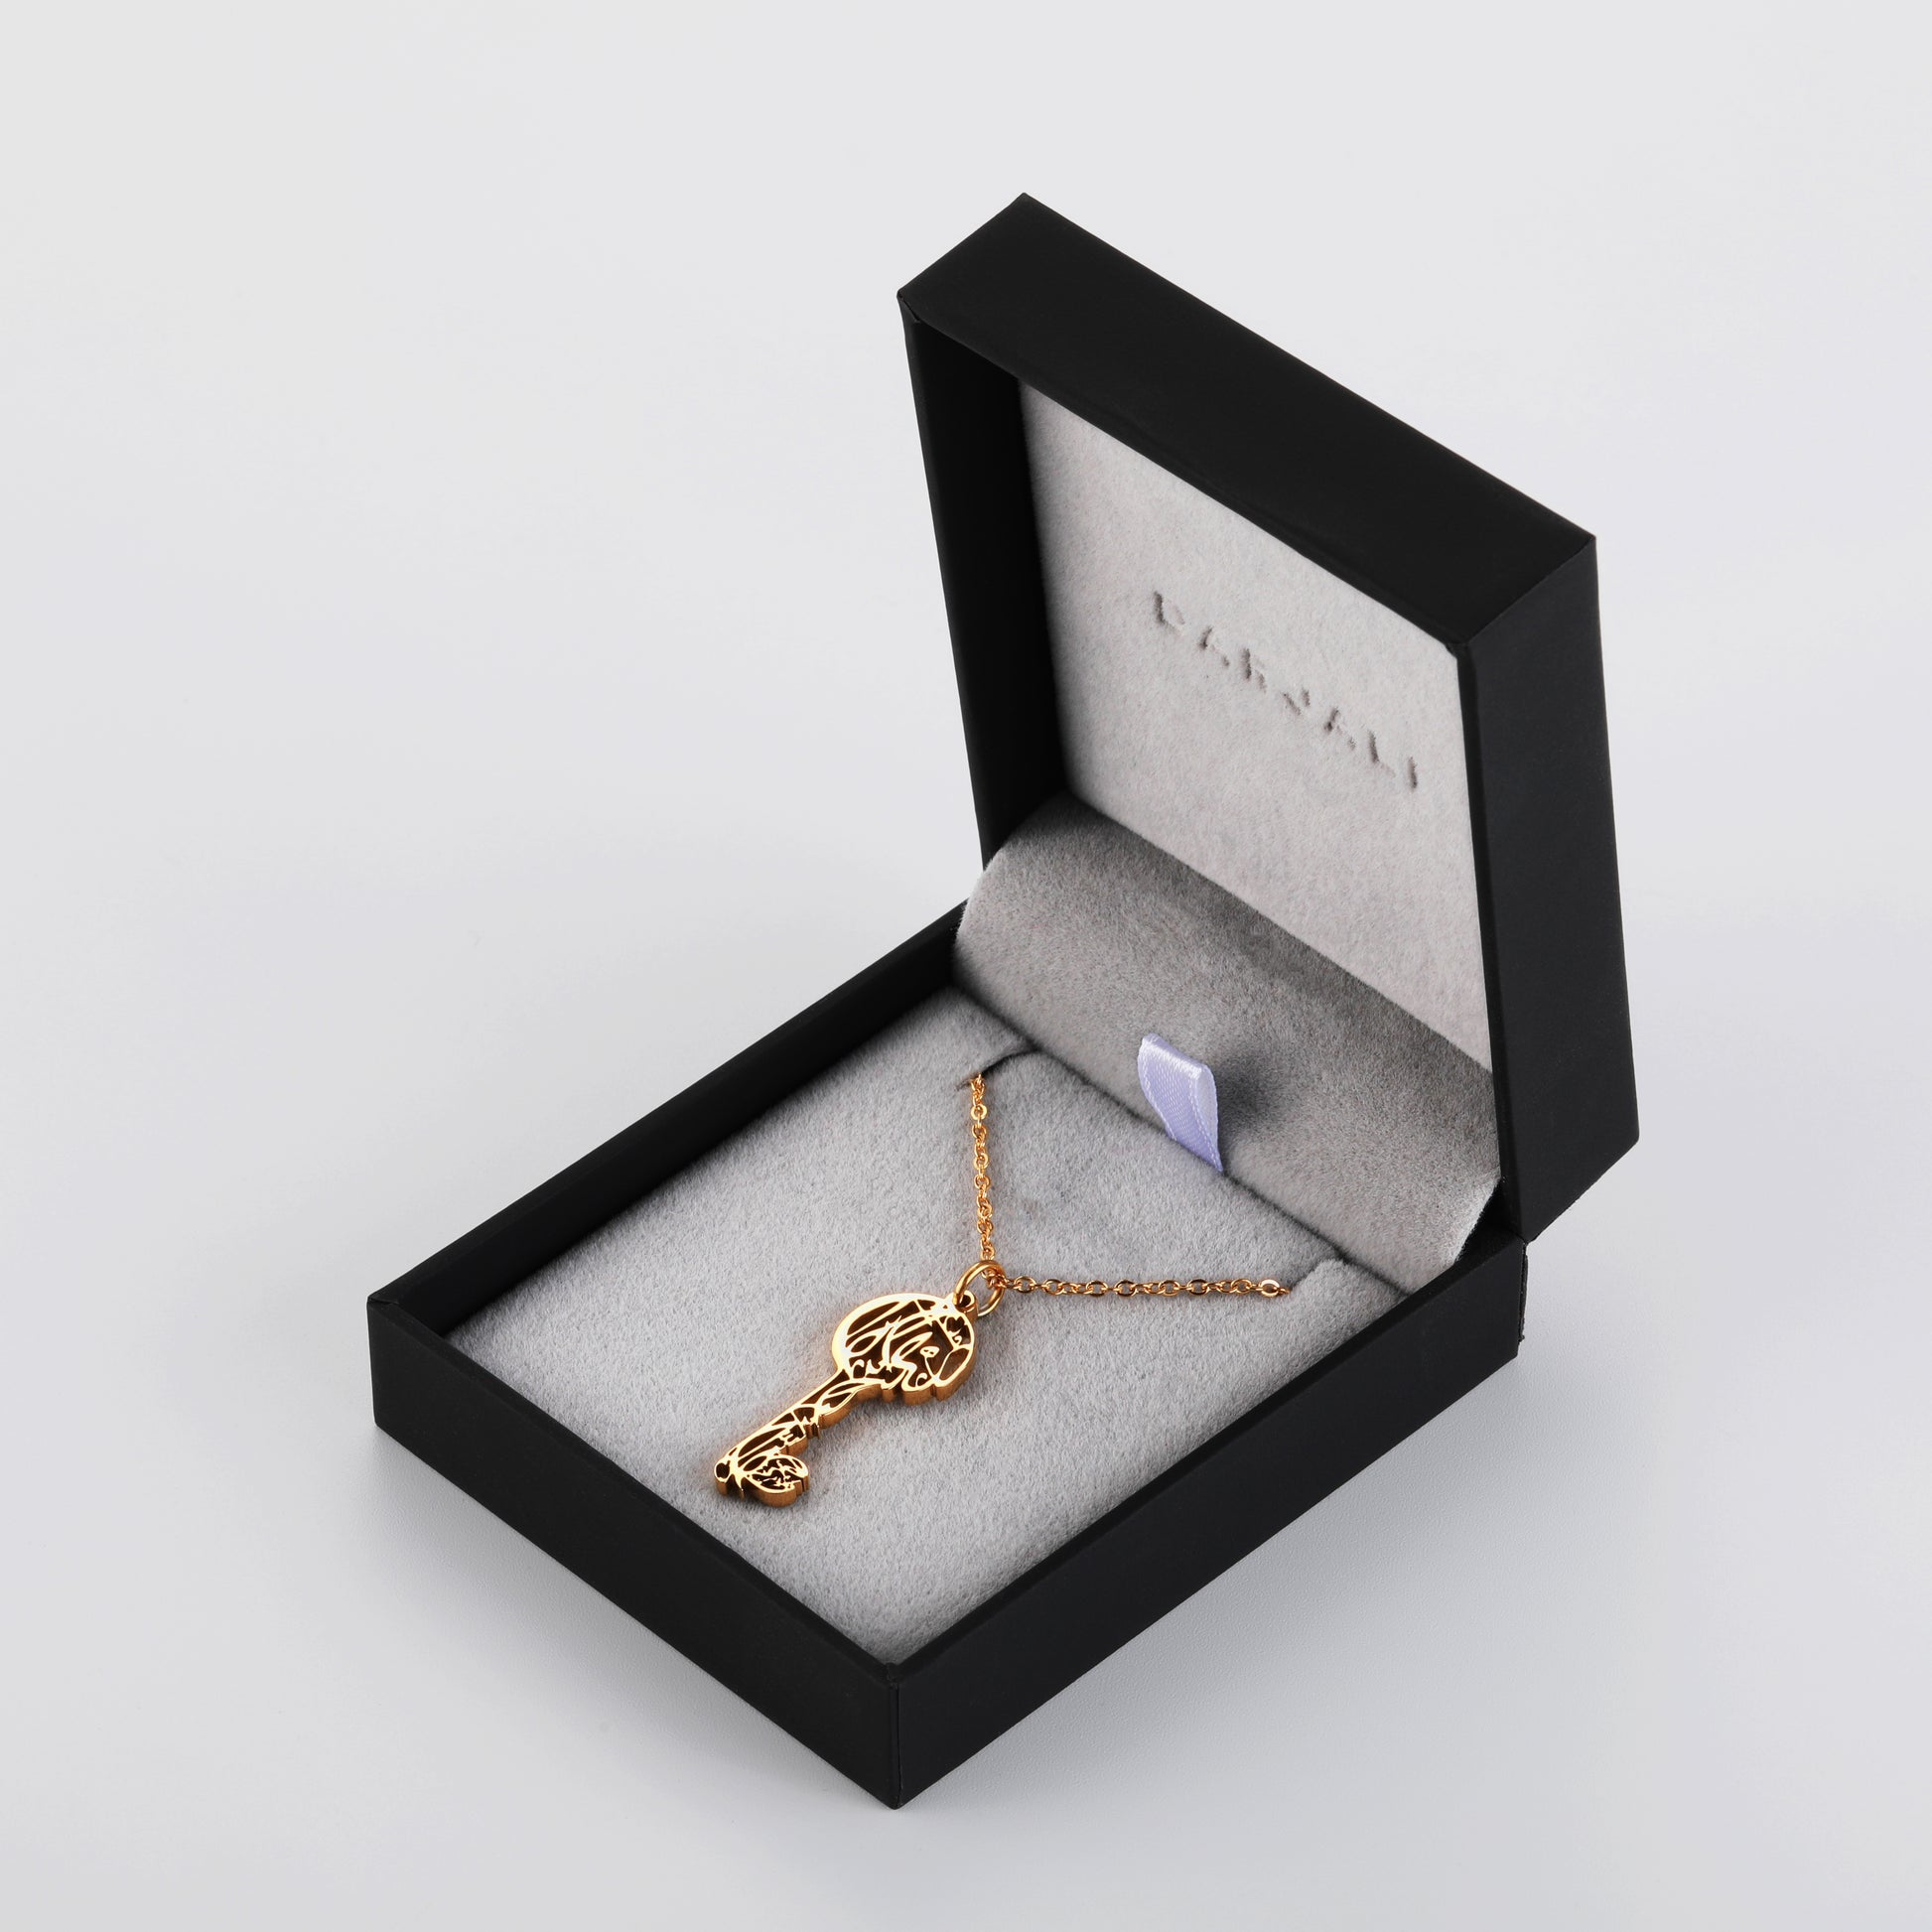 Darjali Jewelry There is no god but God Necklace 18K Gold Box